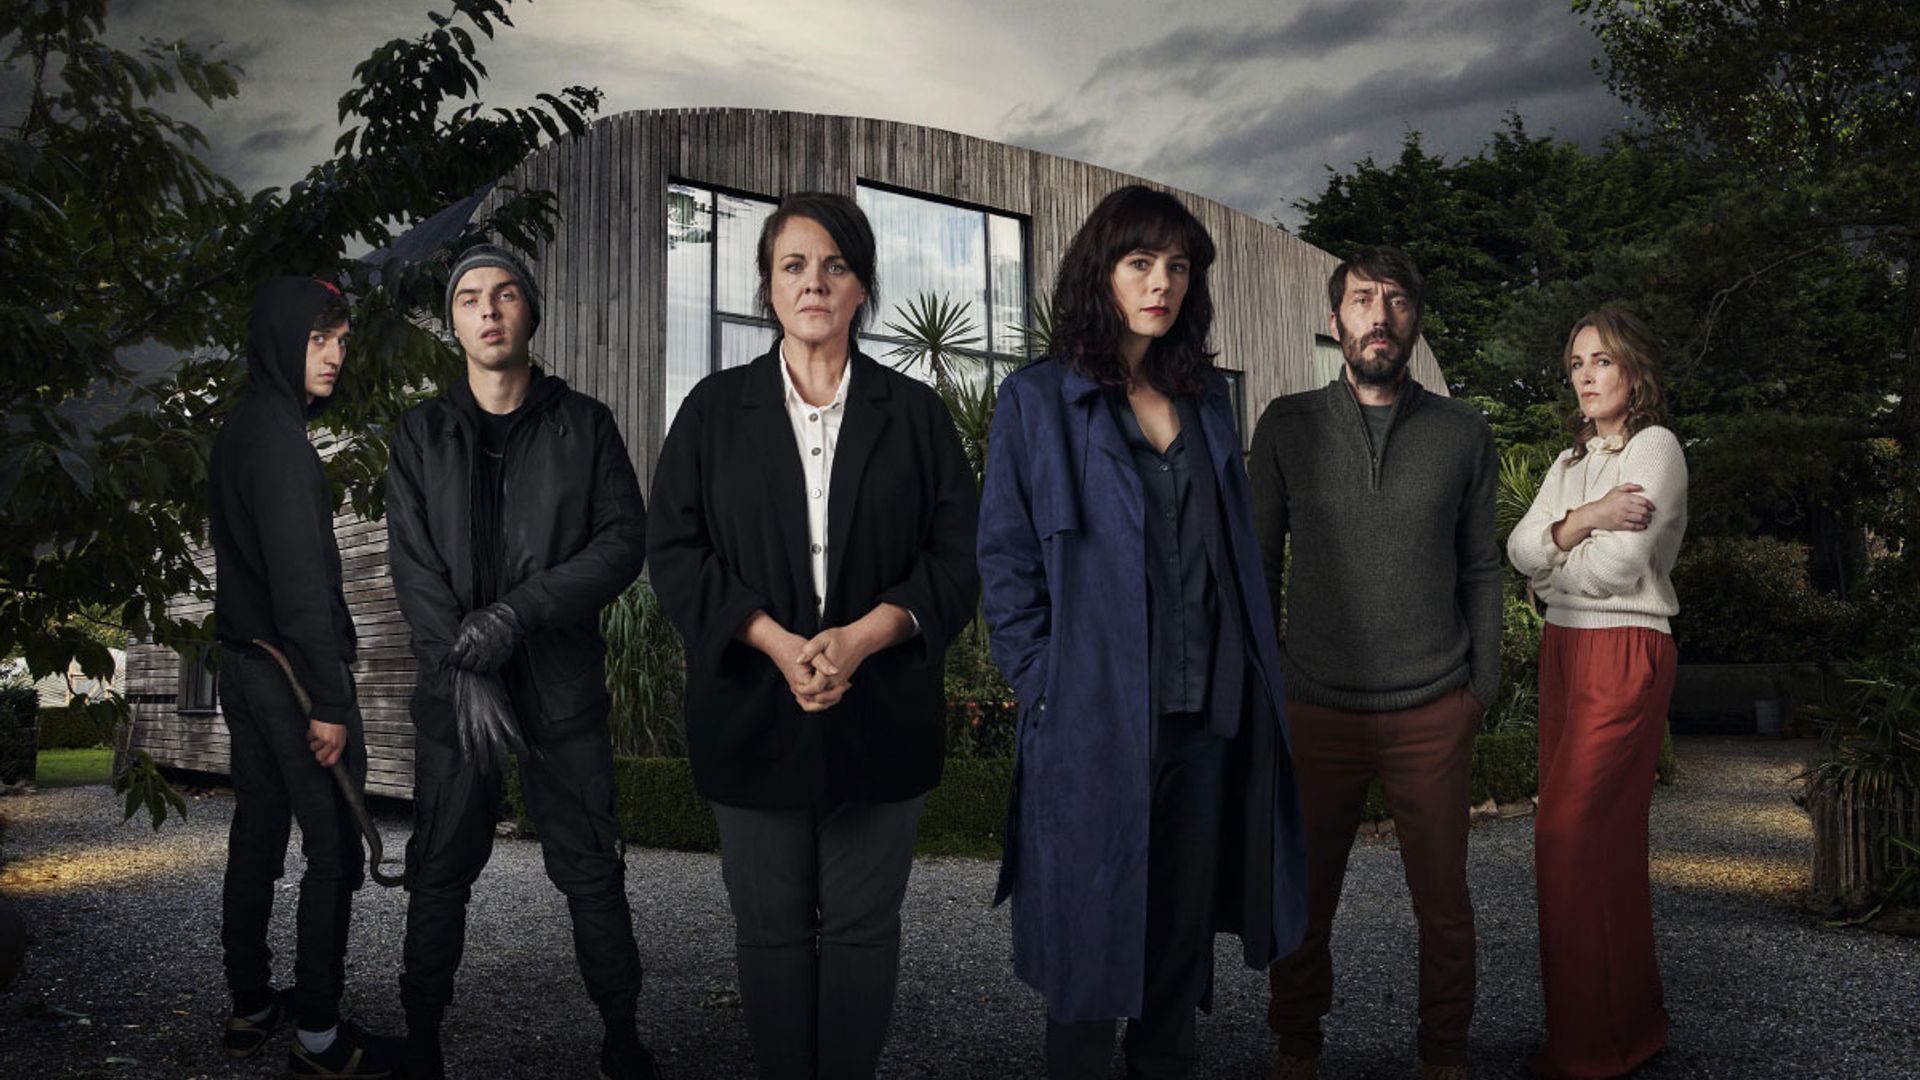 Intruder: meet the cast of the new Channel 5 thriller